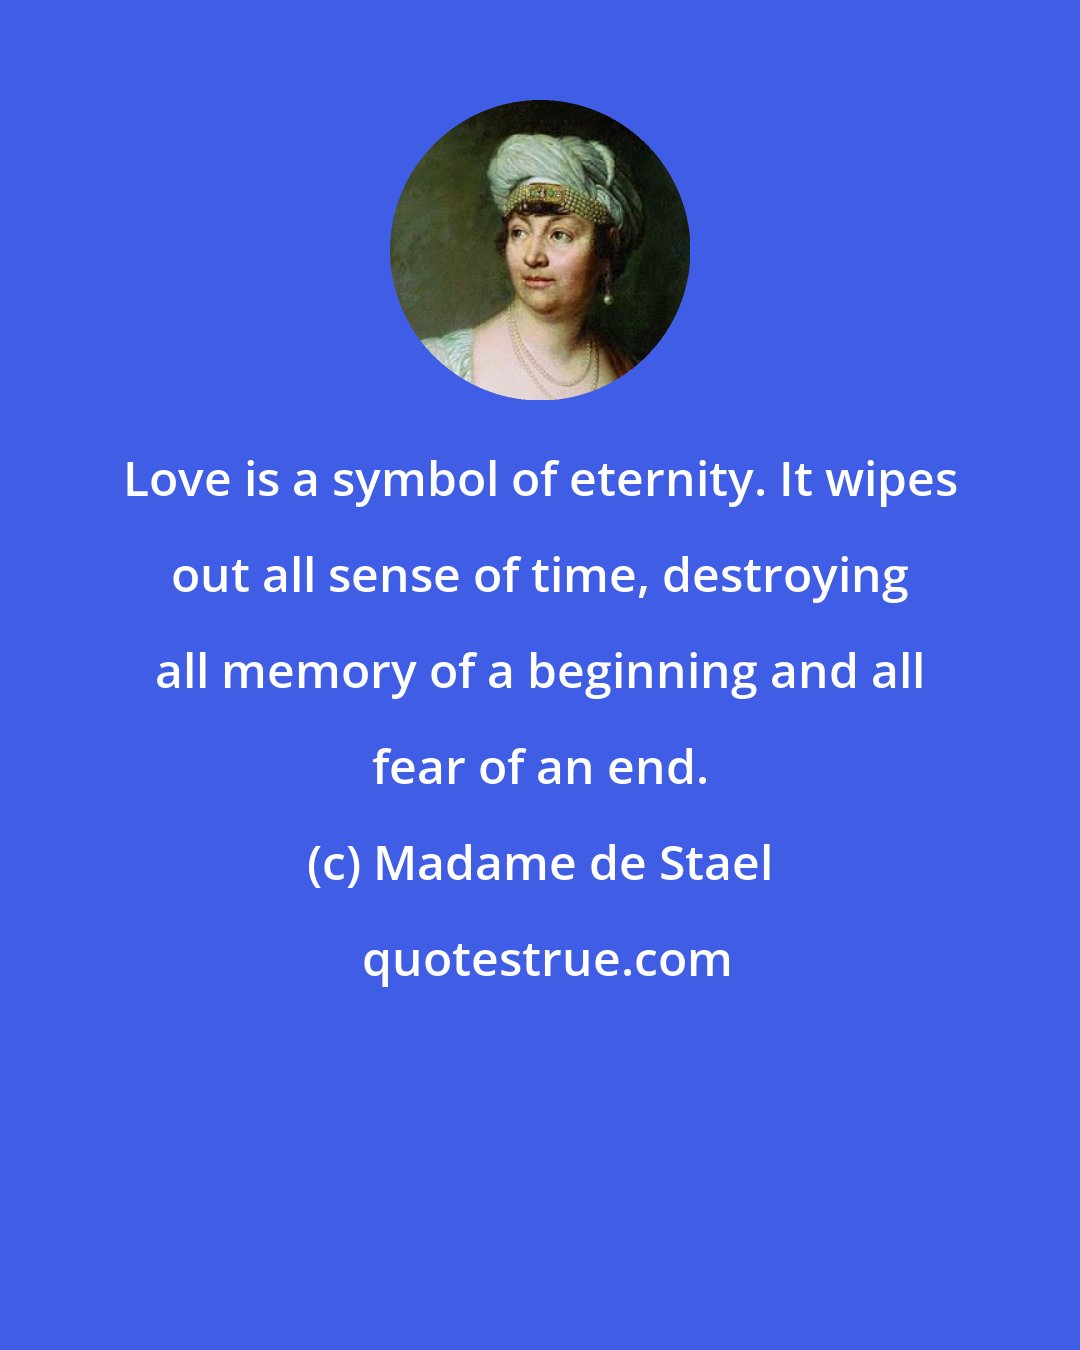 Madame de Stael: Love is a symbol of eternity. It wipes out all sense of time, destroying all memory of a beginning and all fear of an end.